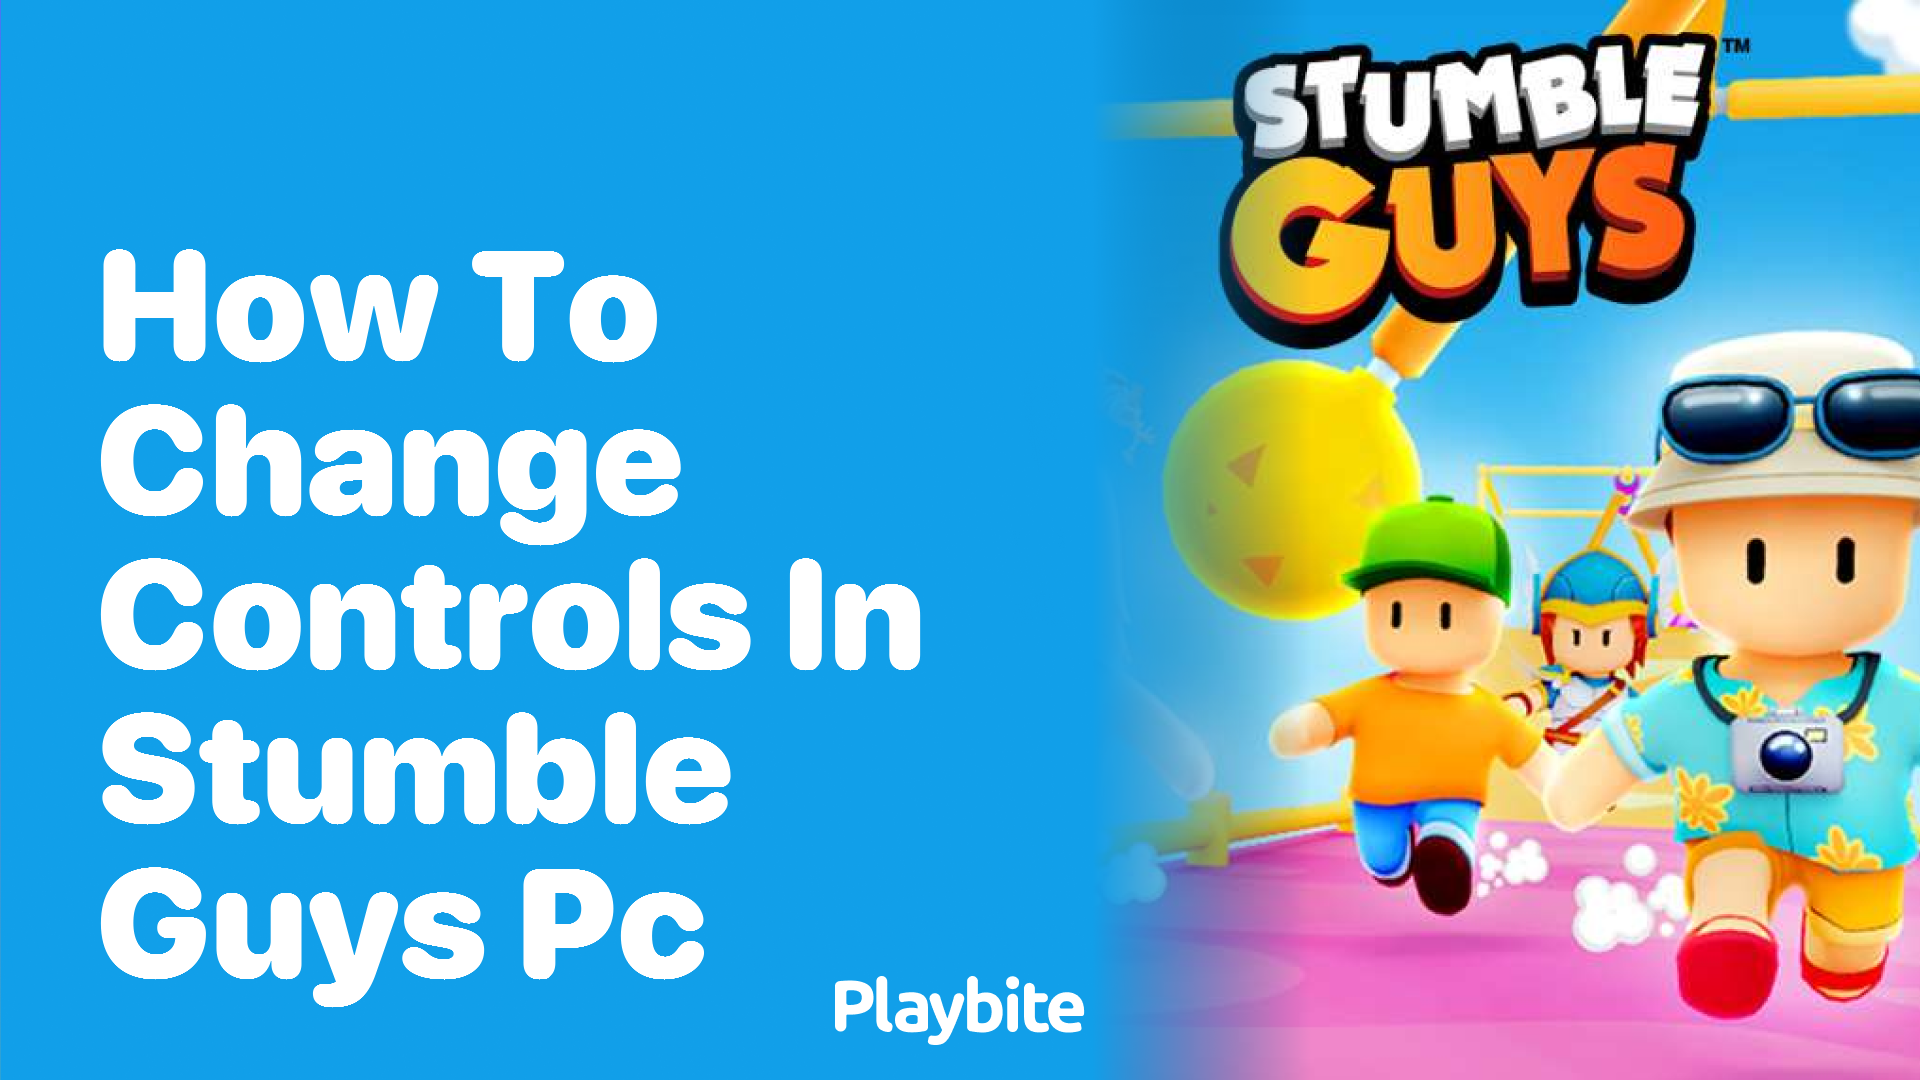 How to Change Controls in Stumble Guys PC: A Simple Guide